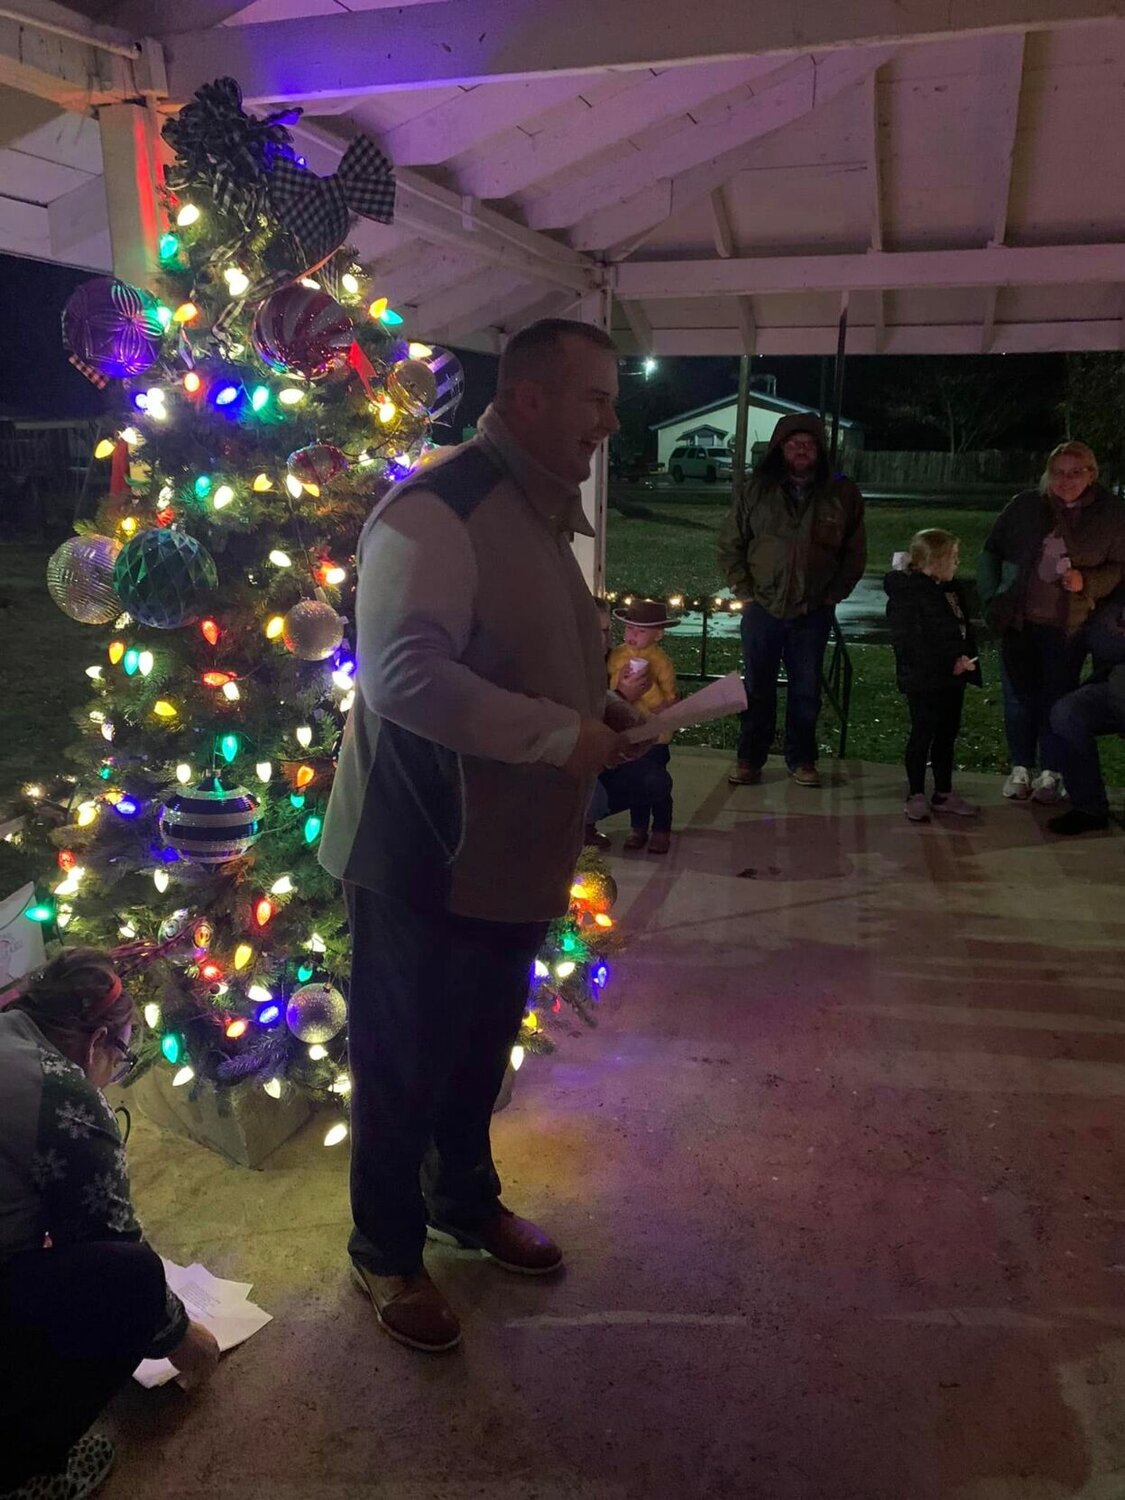 The Village of Diggins celebrated the season Saturday, Dec. 2 with an "Old Fashioned Village Christmas". The night was filled with cheer and fellowship.